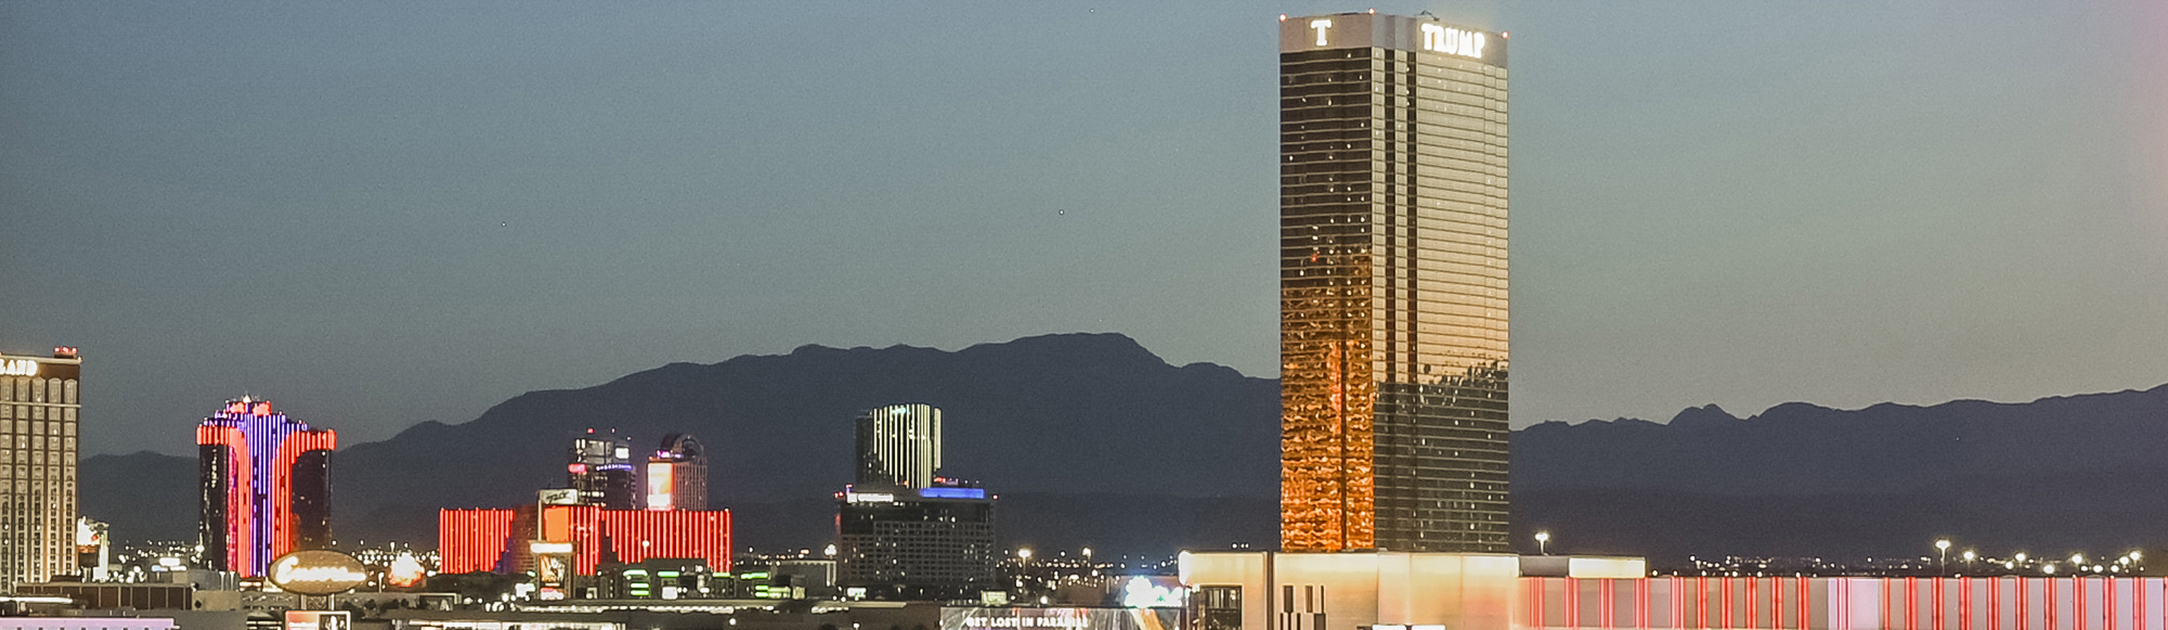 Gold high rise with a sign that says Trump with high rises and mountains in the background.